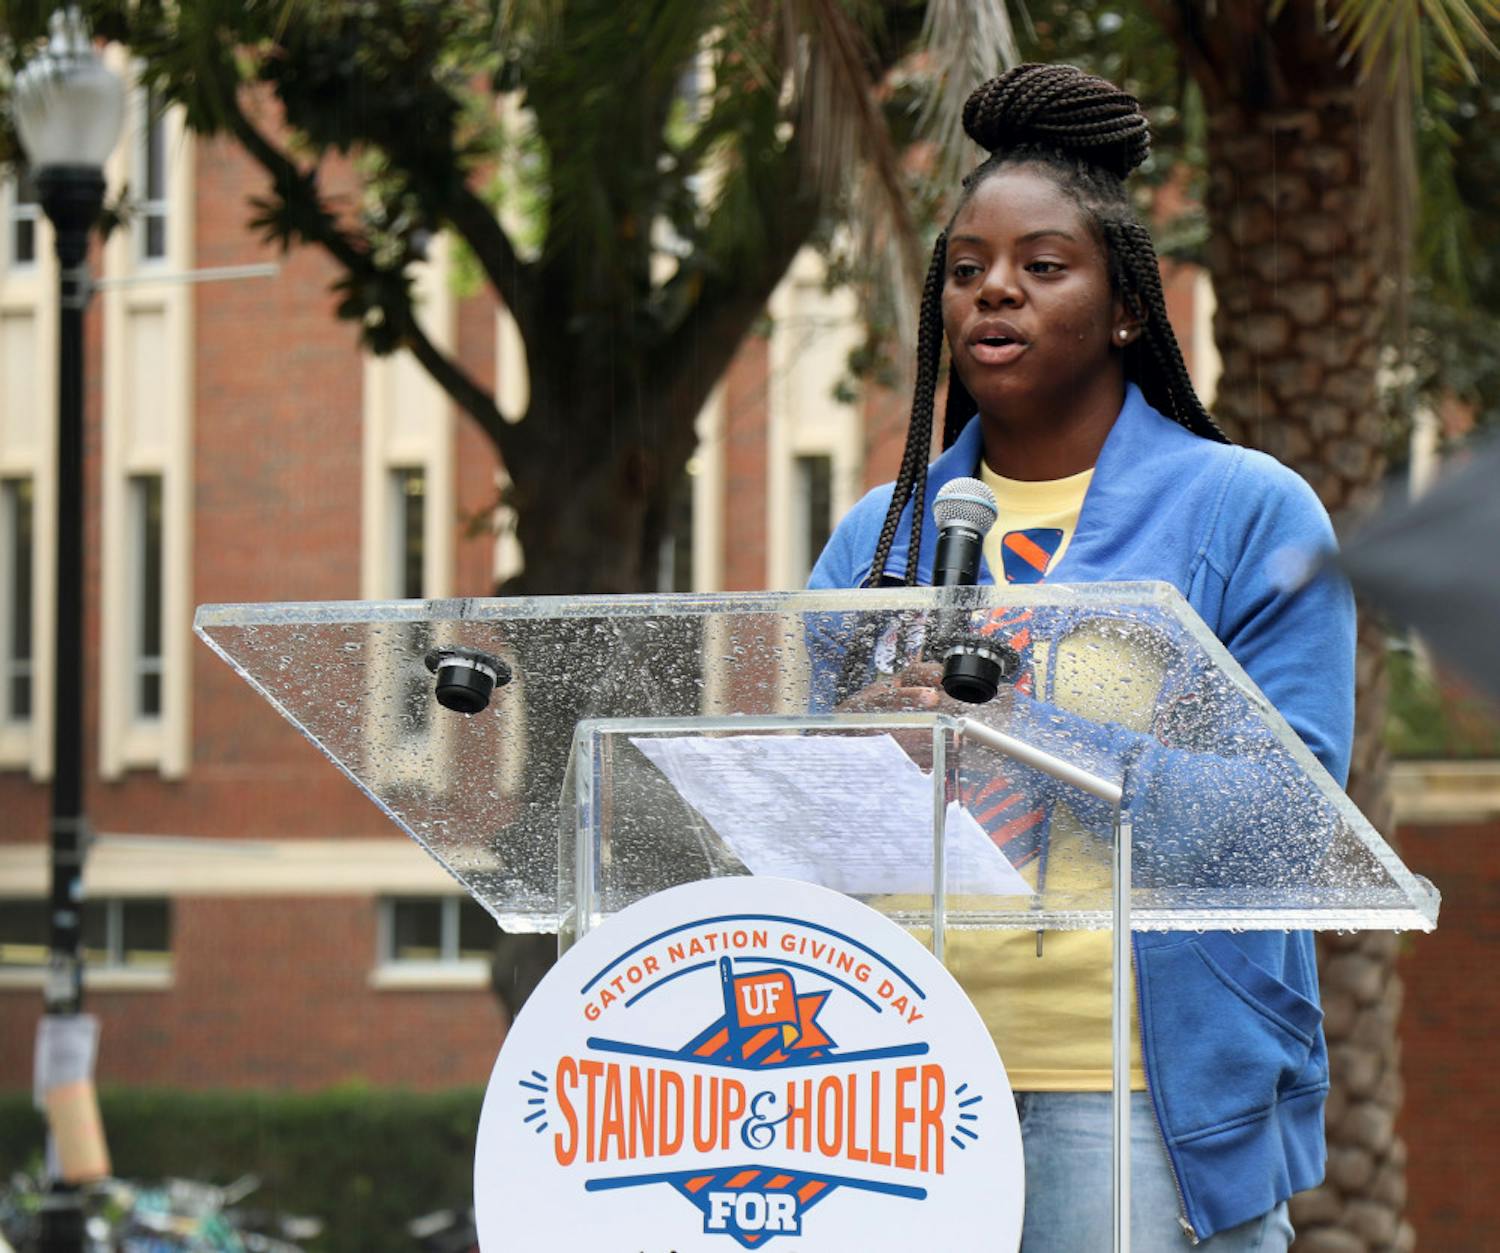 Akiya Parks, a first-generation student and Machen Florida Opportunity Scholar, addresses the crowd on the Plaza of the Americas Feb. 26, 2019, for the “Stand Up and Holler: Gator Nation Giving Day.” 